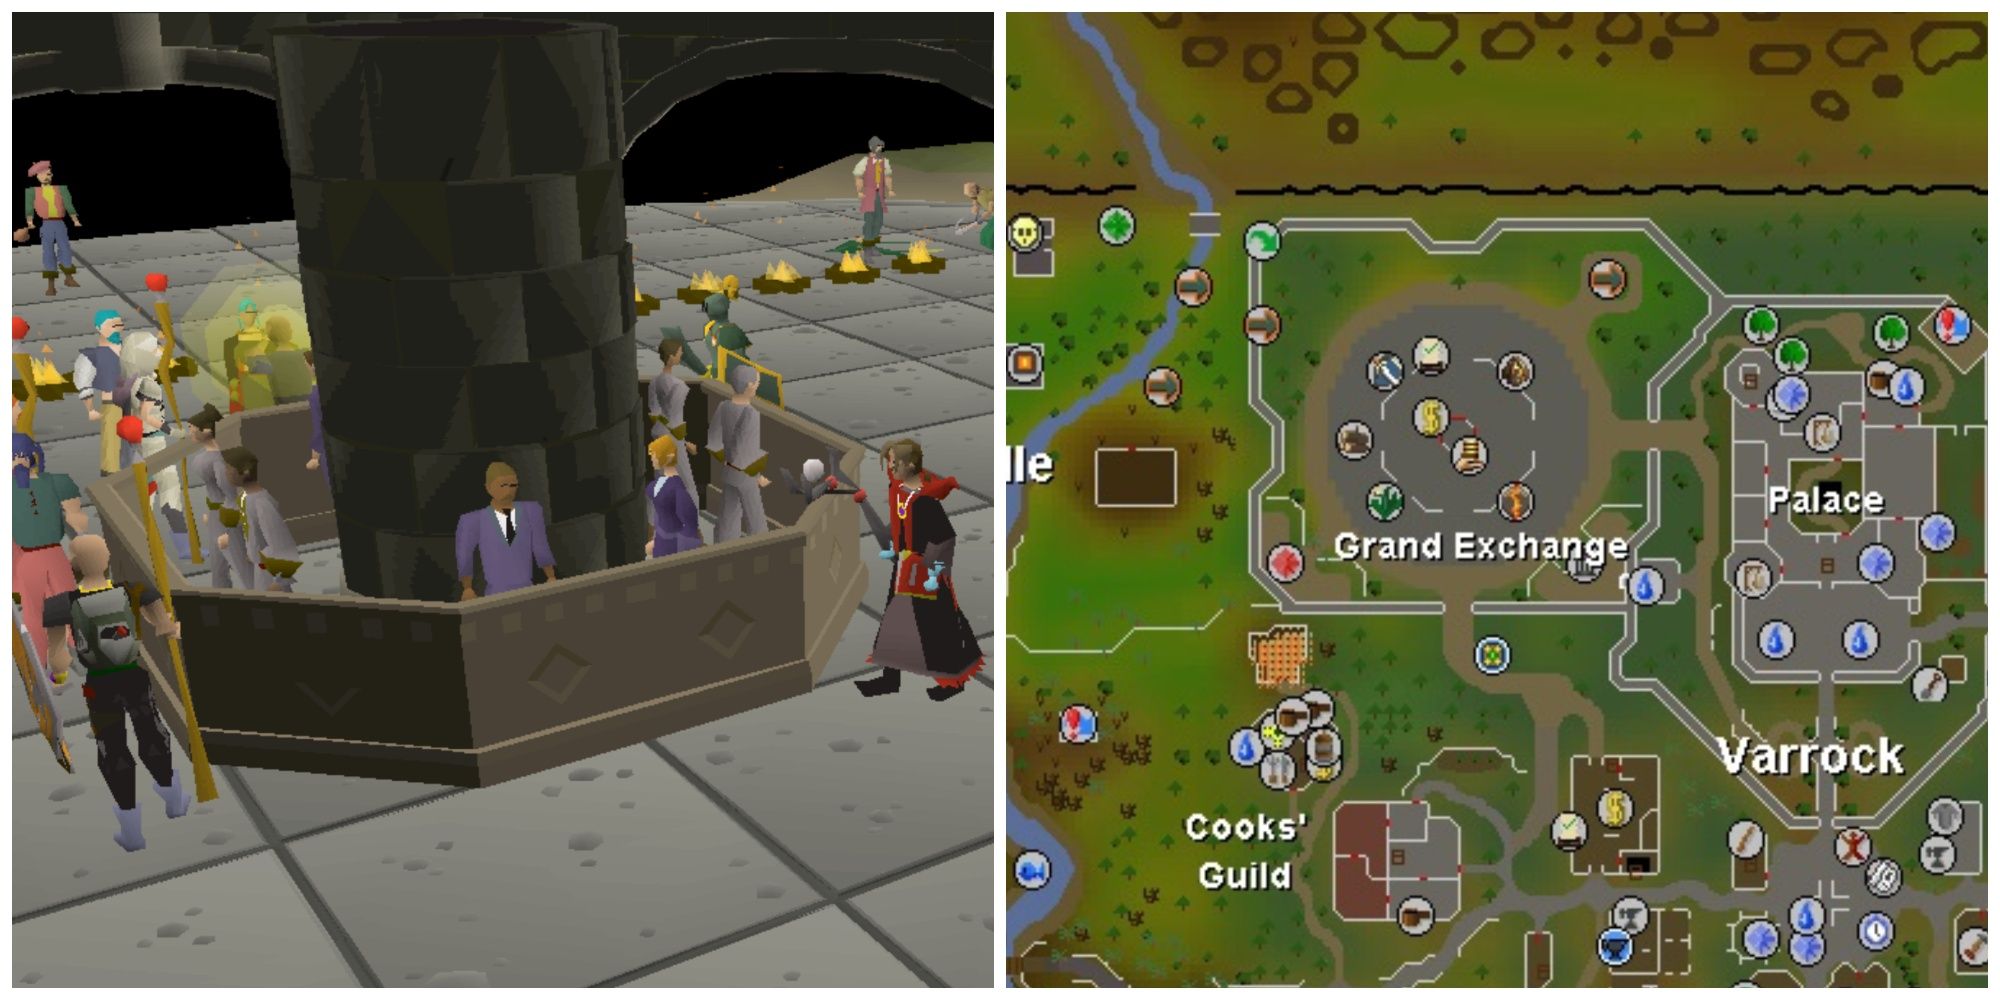 Spilt image showing the Grand Exchange in Varrock and a map showing its location.